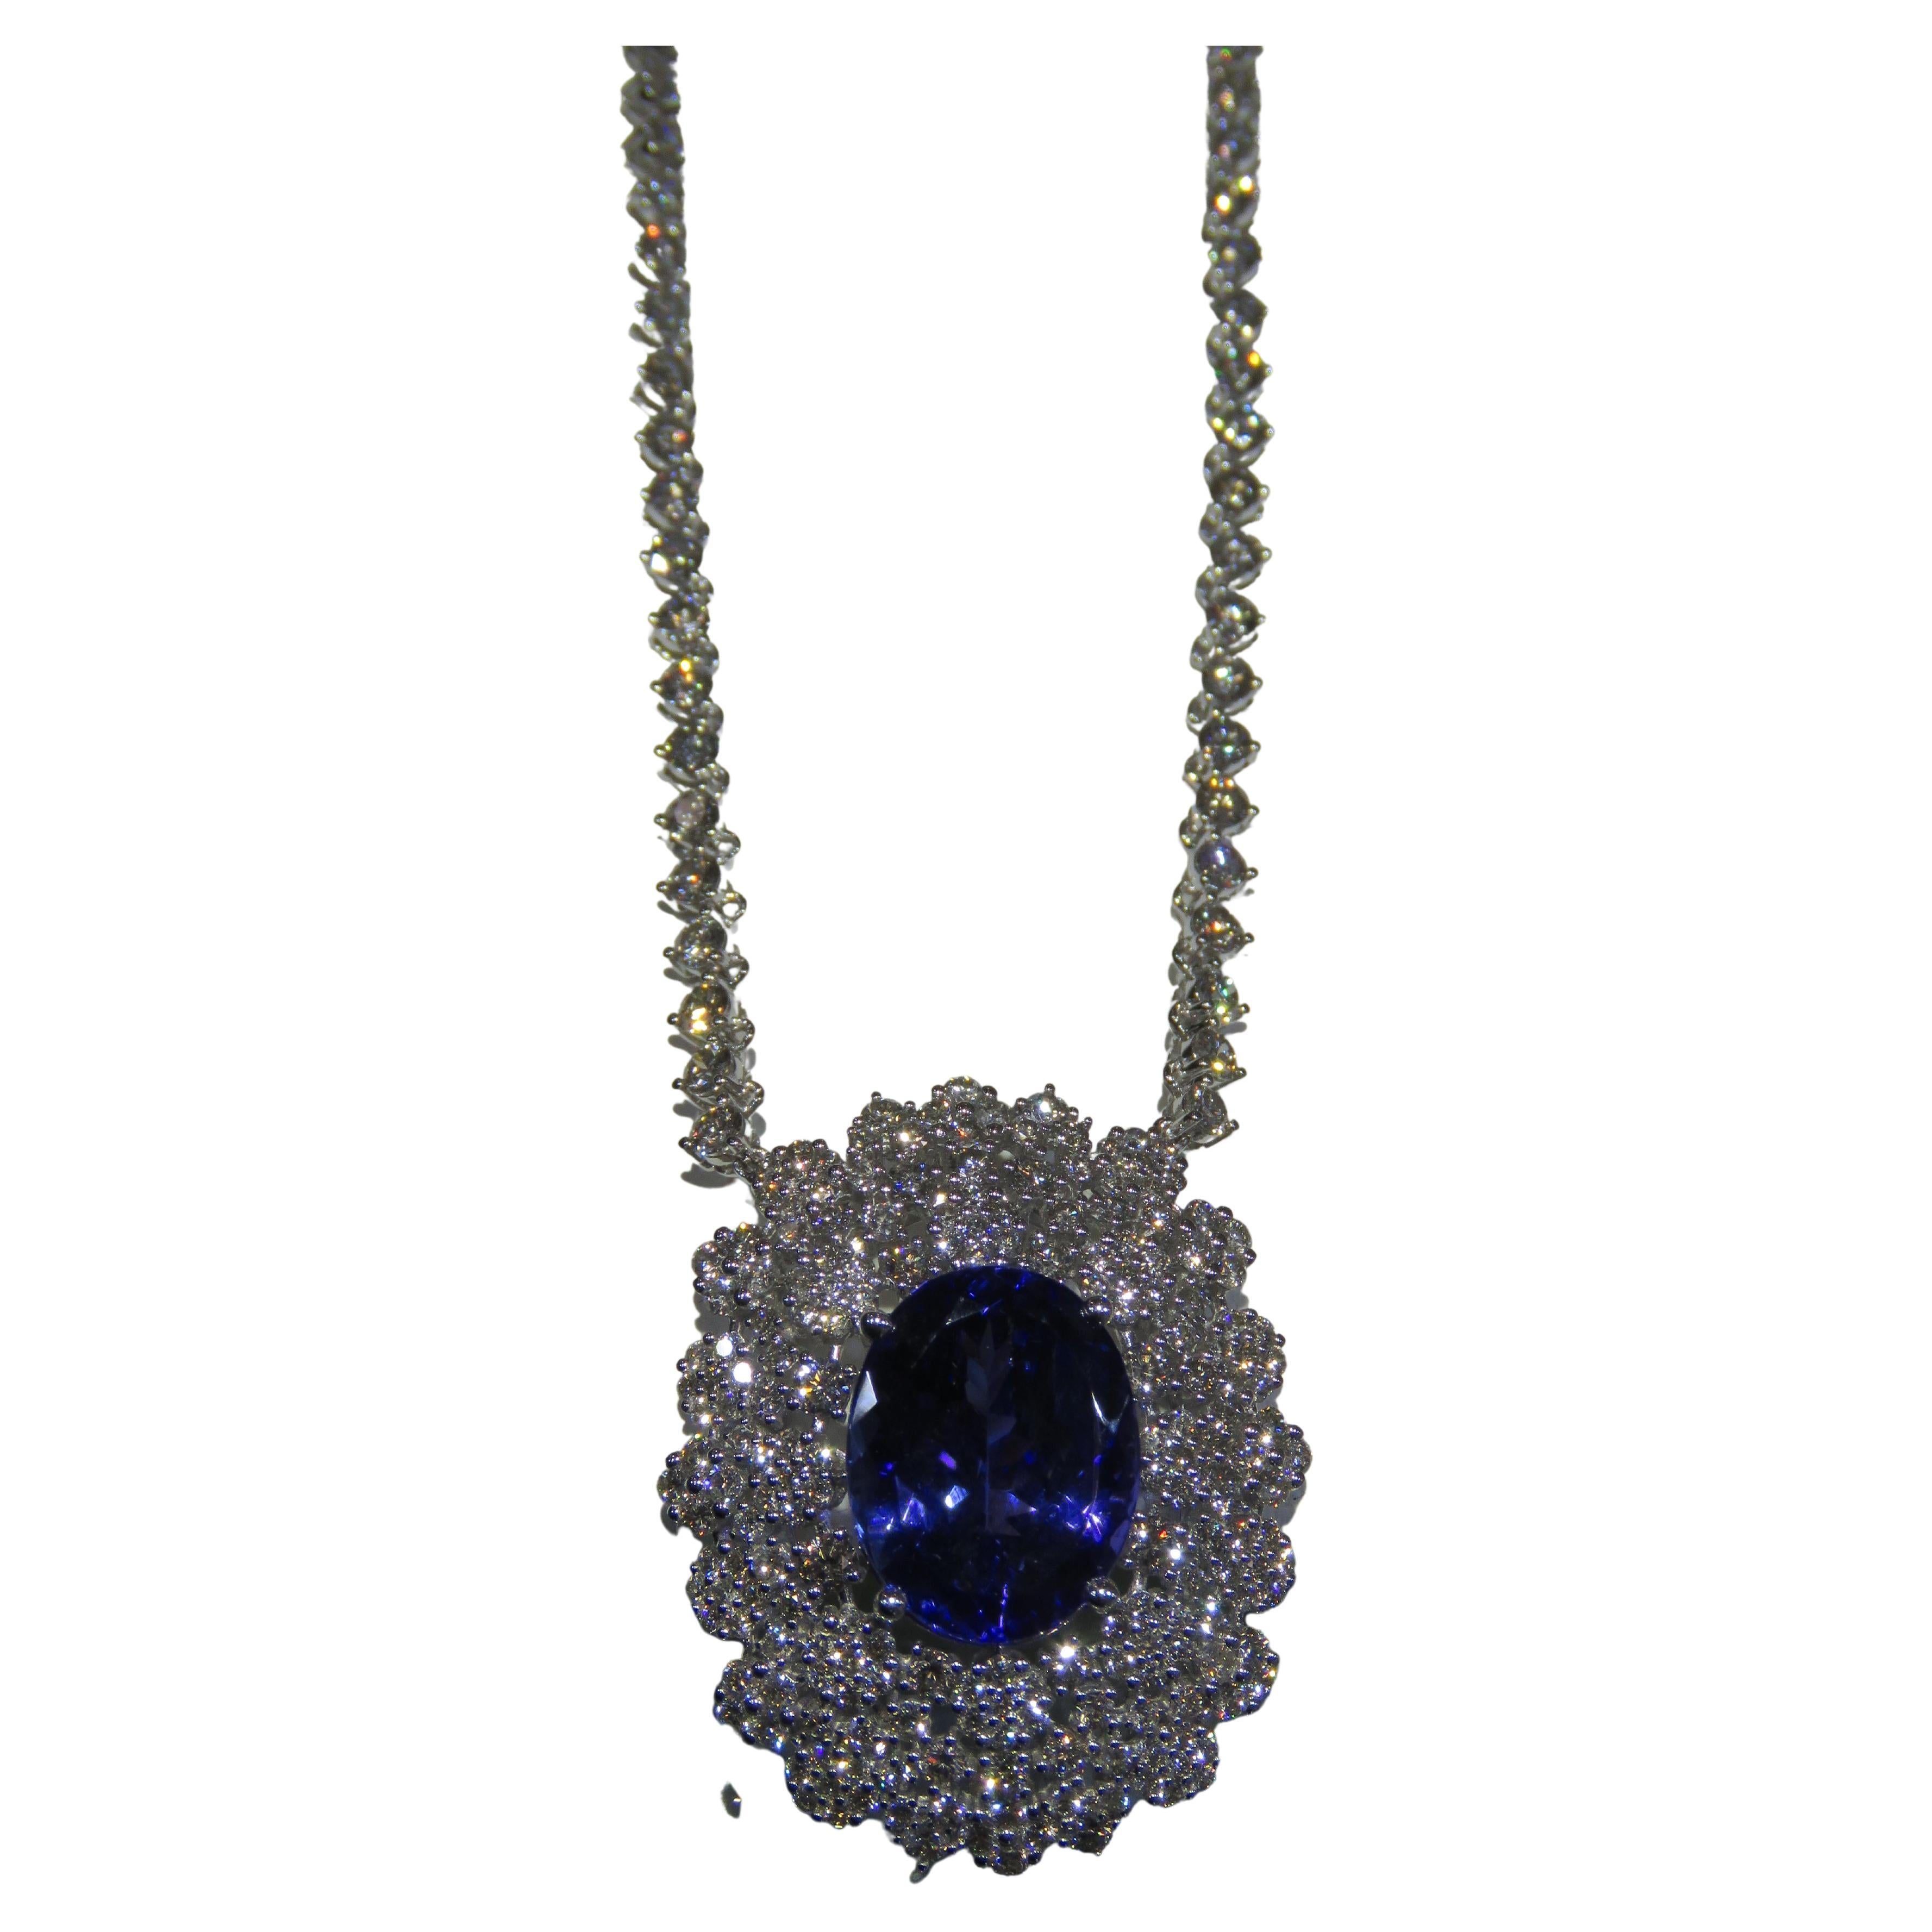 NWT $36, 769 Rare Gorgeous 18KT Gold Fancy Tanzanite and Diamond Pendant Necklace